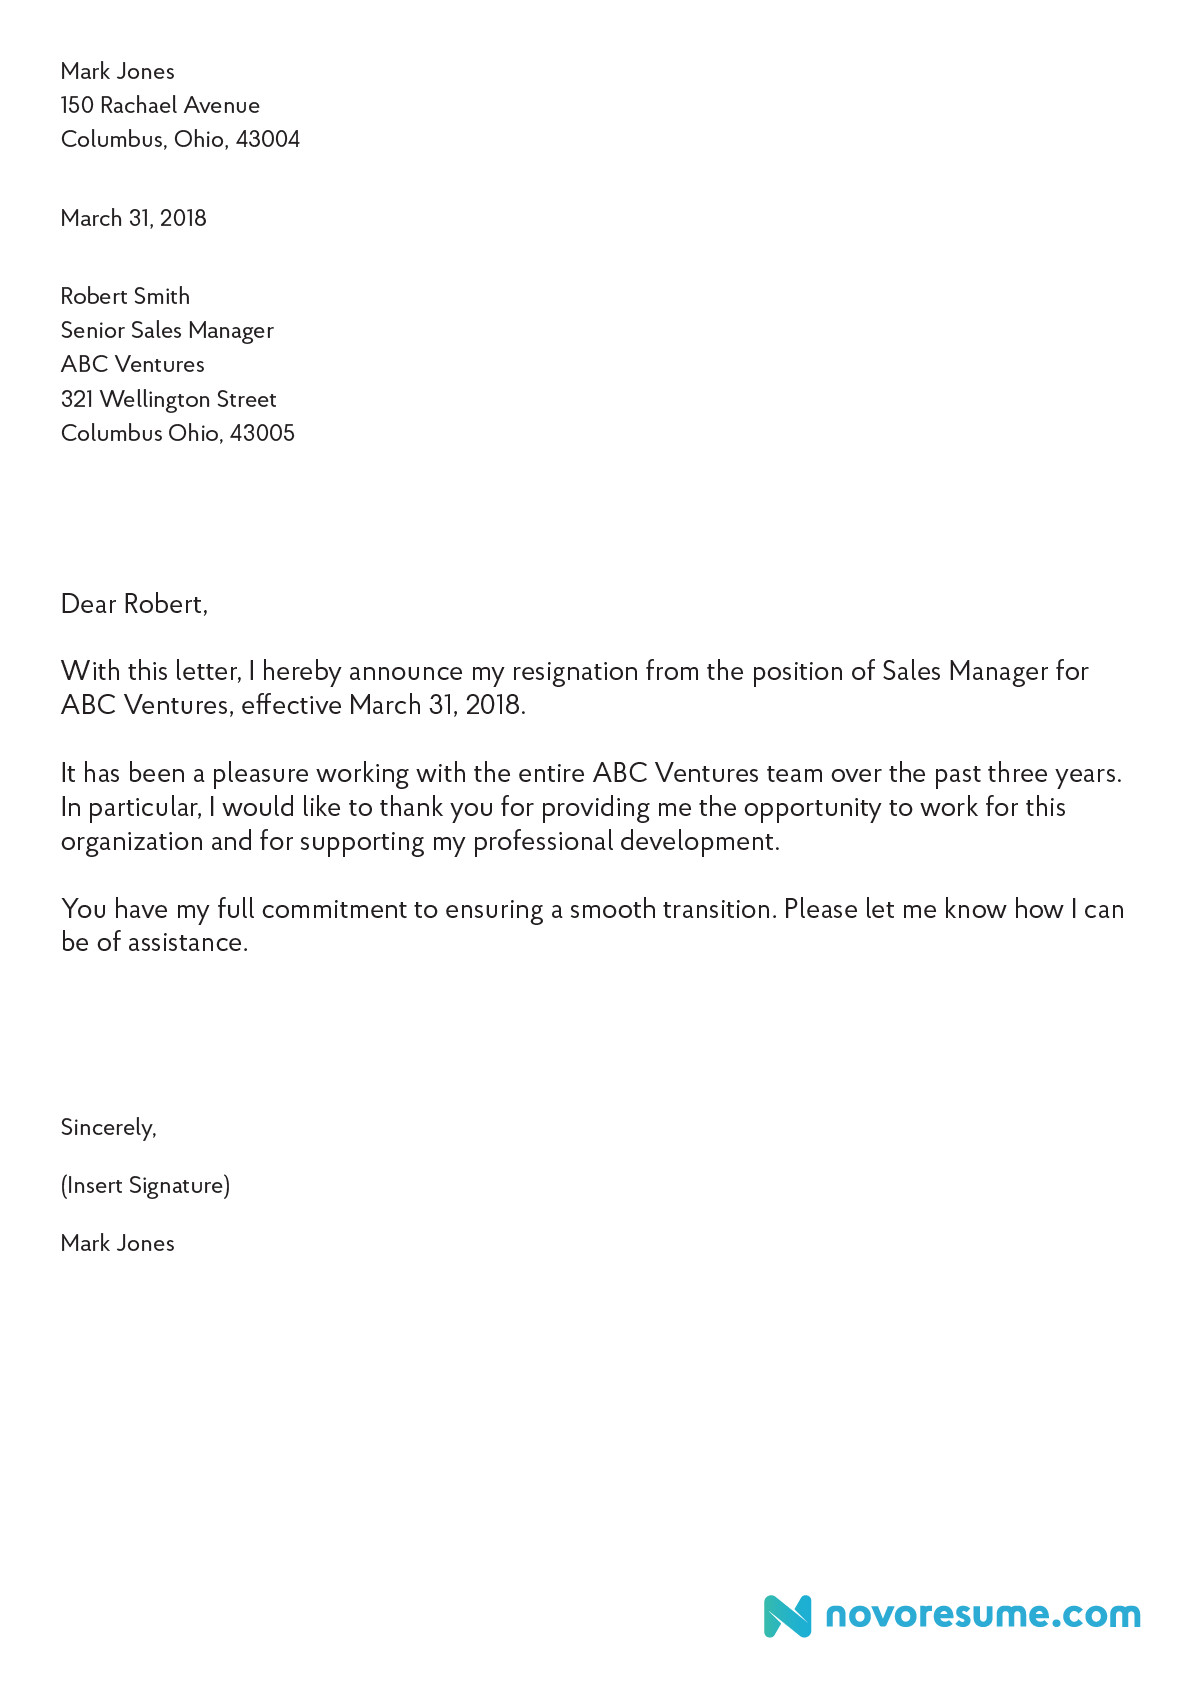 Letters Of Resignation Template How to Write A Letter Of Resignation – 2019 Extensive Guide